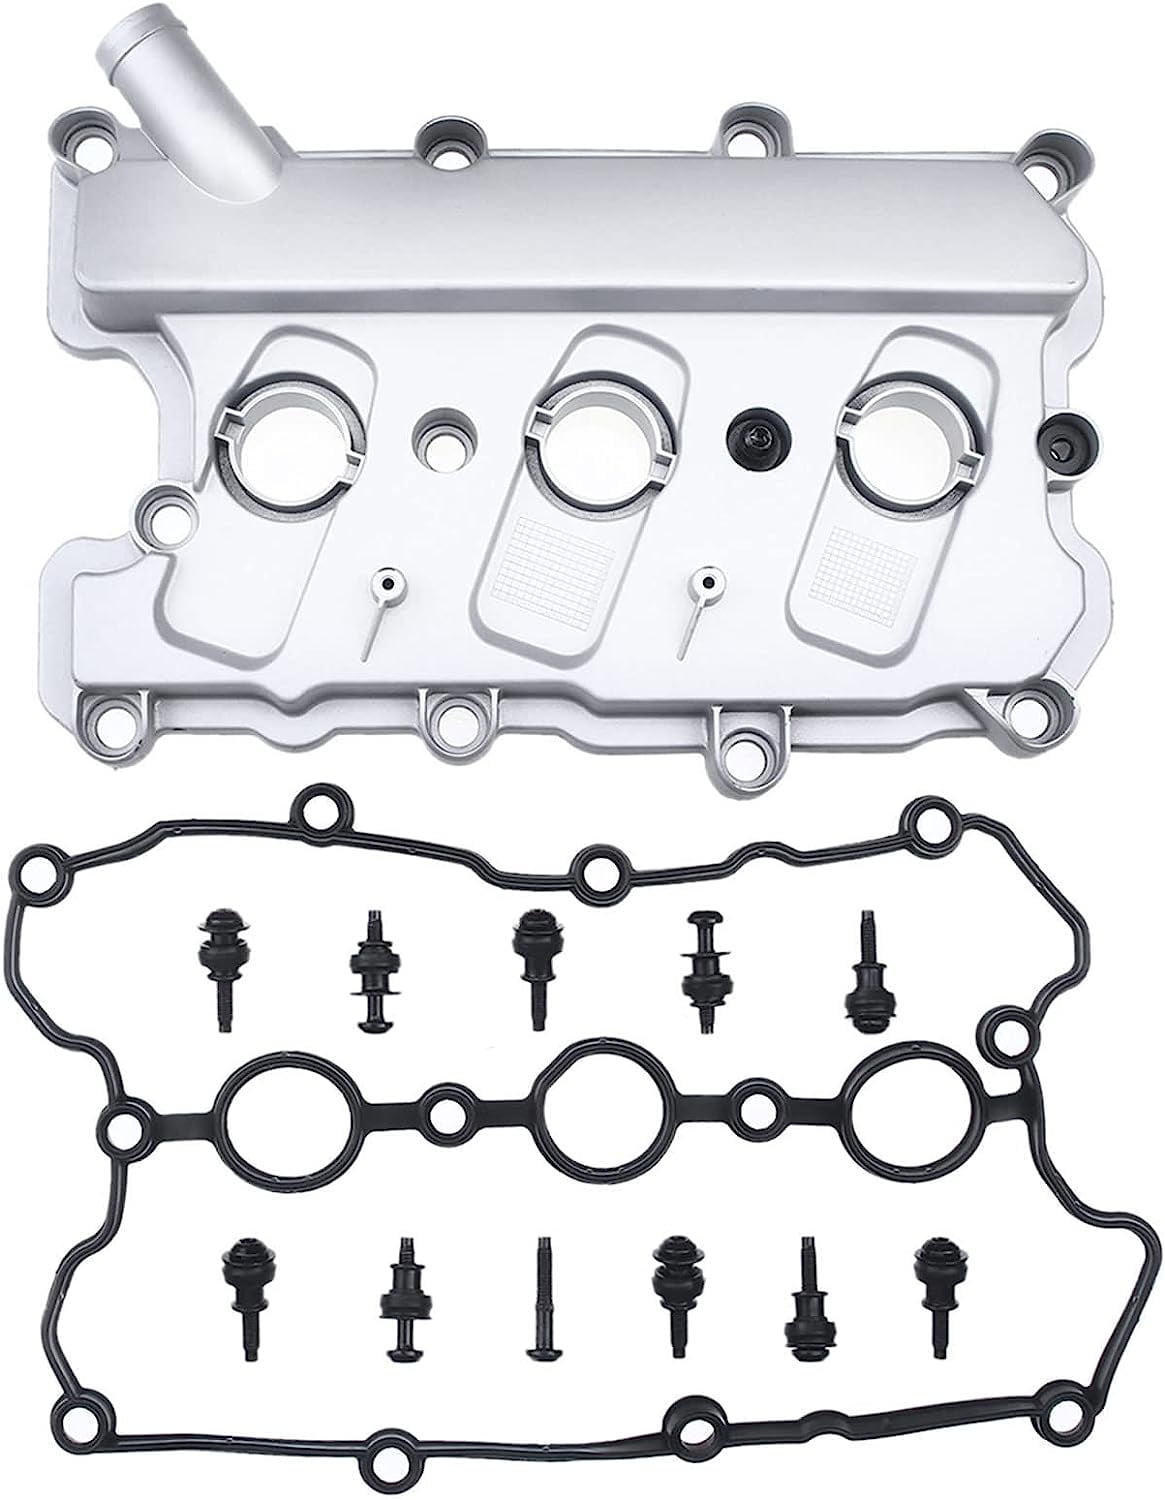 A-Premium Right Engine Valve Cover, with Gasket  Bolts, Compatible with  Audi A4 Quattro, A5 Quattro, A6 Quattro, A7 Quattro, A8 Quattro, Q5, Q7,  S4, S5, SQ5, Touareg, 2.8L 3.0L 3.2L